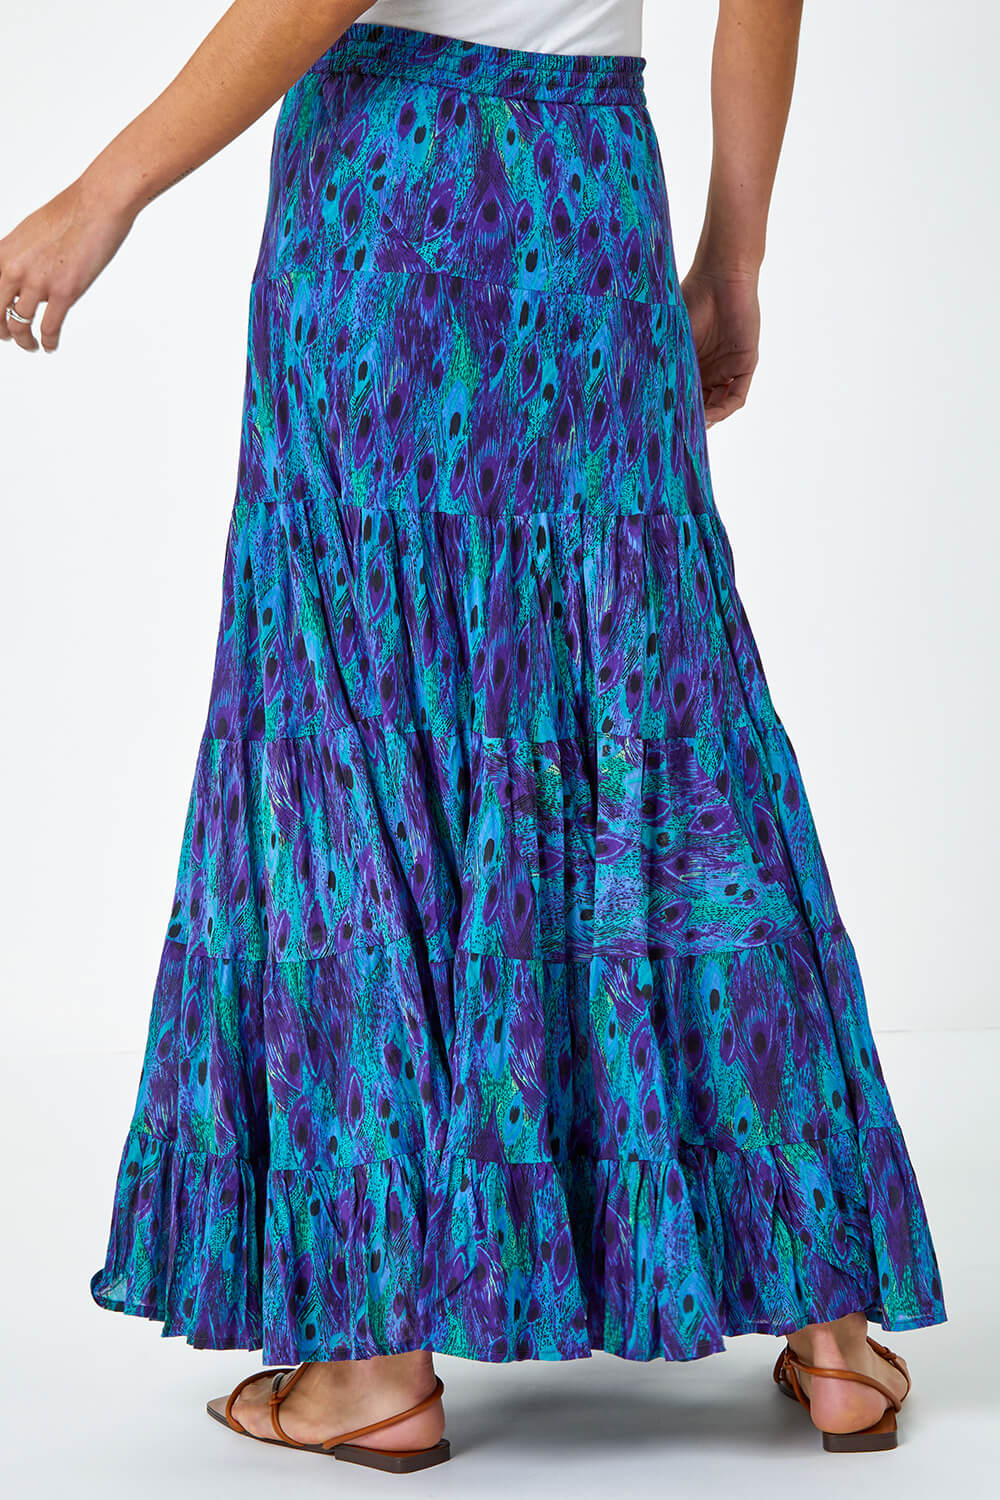 Blue Feather Print Tiered Cotton Maxi Skirt, Image 4 of 6